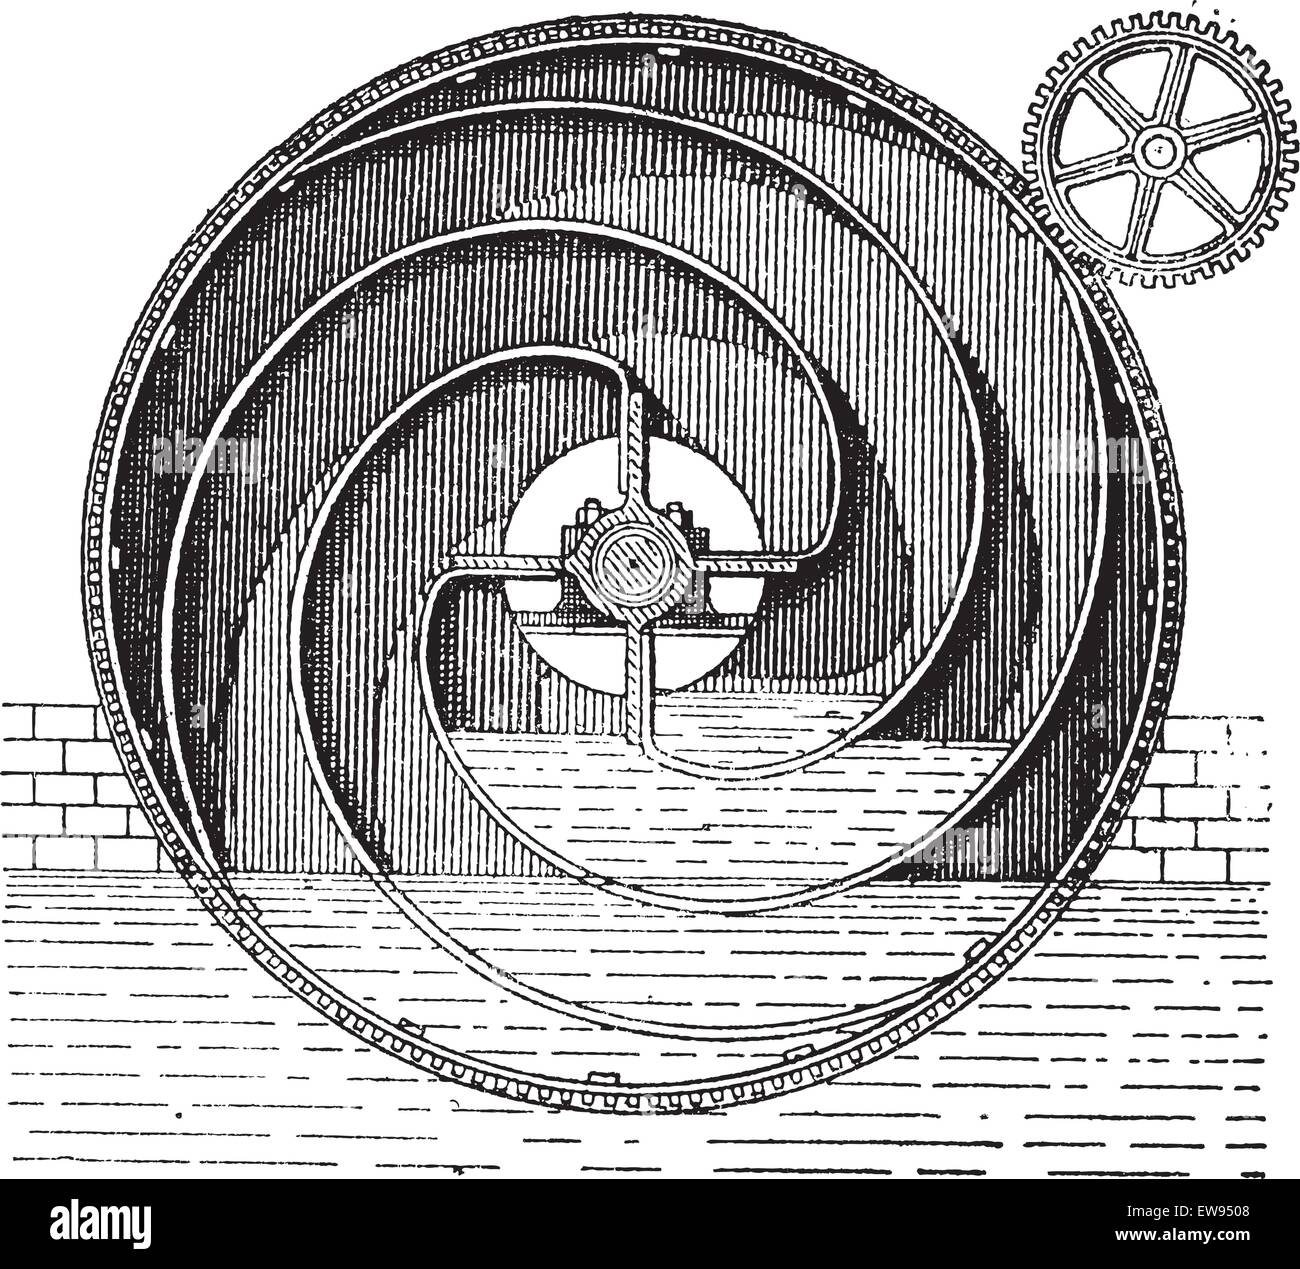 10,771 Rotary Cutting Wheel Images, Stock Photos, 3D objects, & Vectors